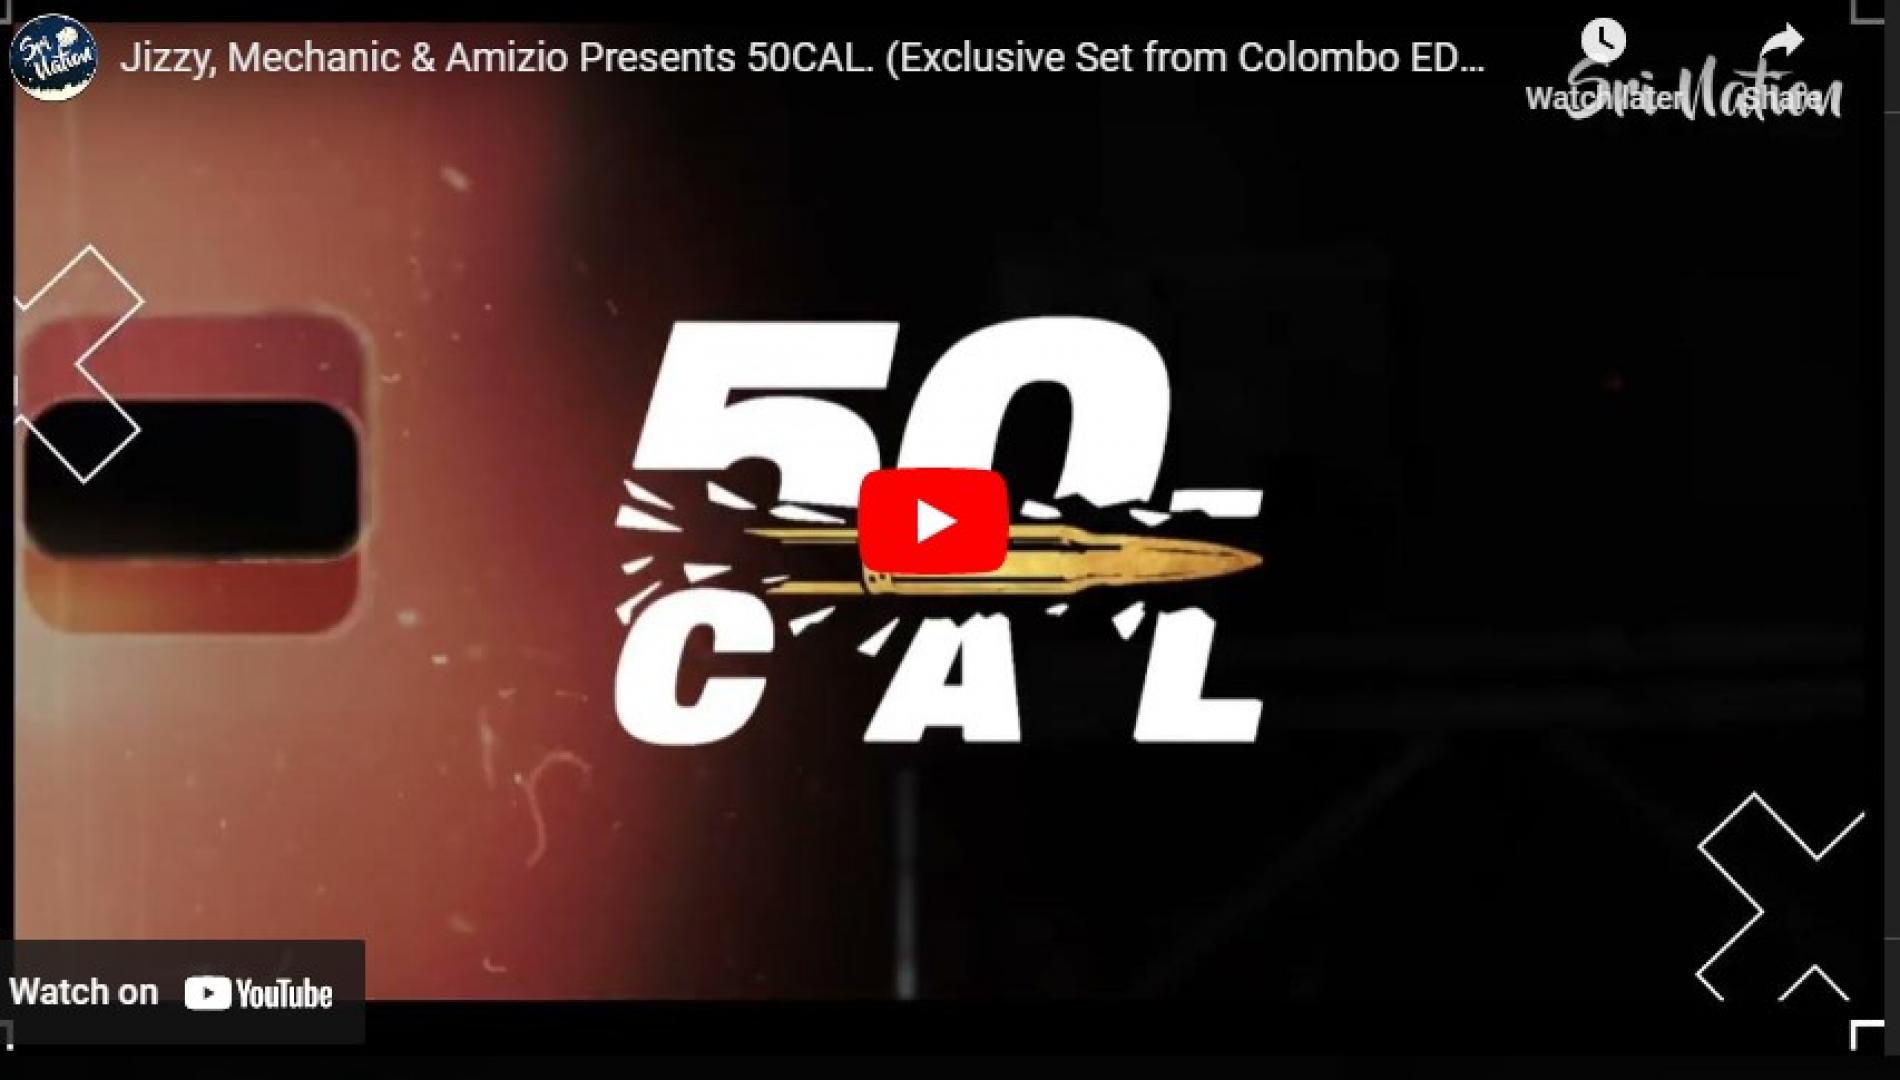 News : Jizzy, Mechanic & Amizio Presents 50CAL (Exclusive Set from Colombo EDM Festival)